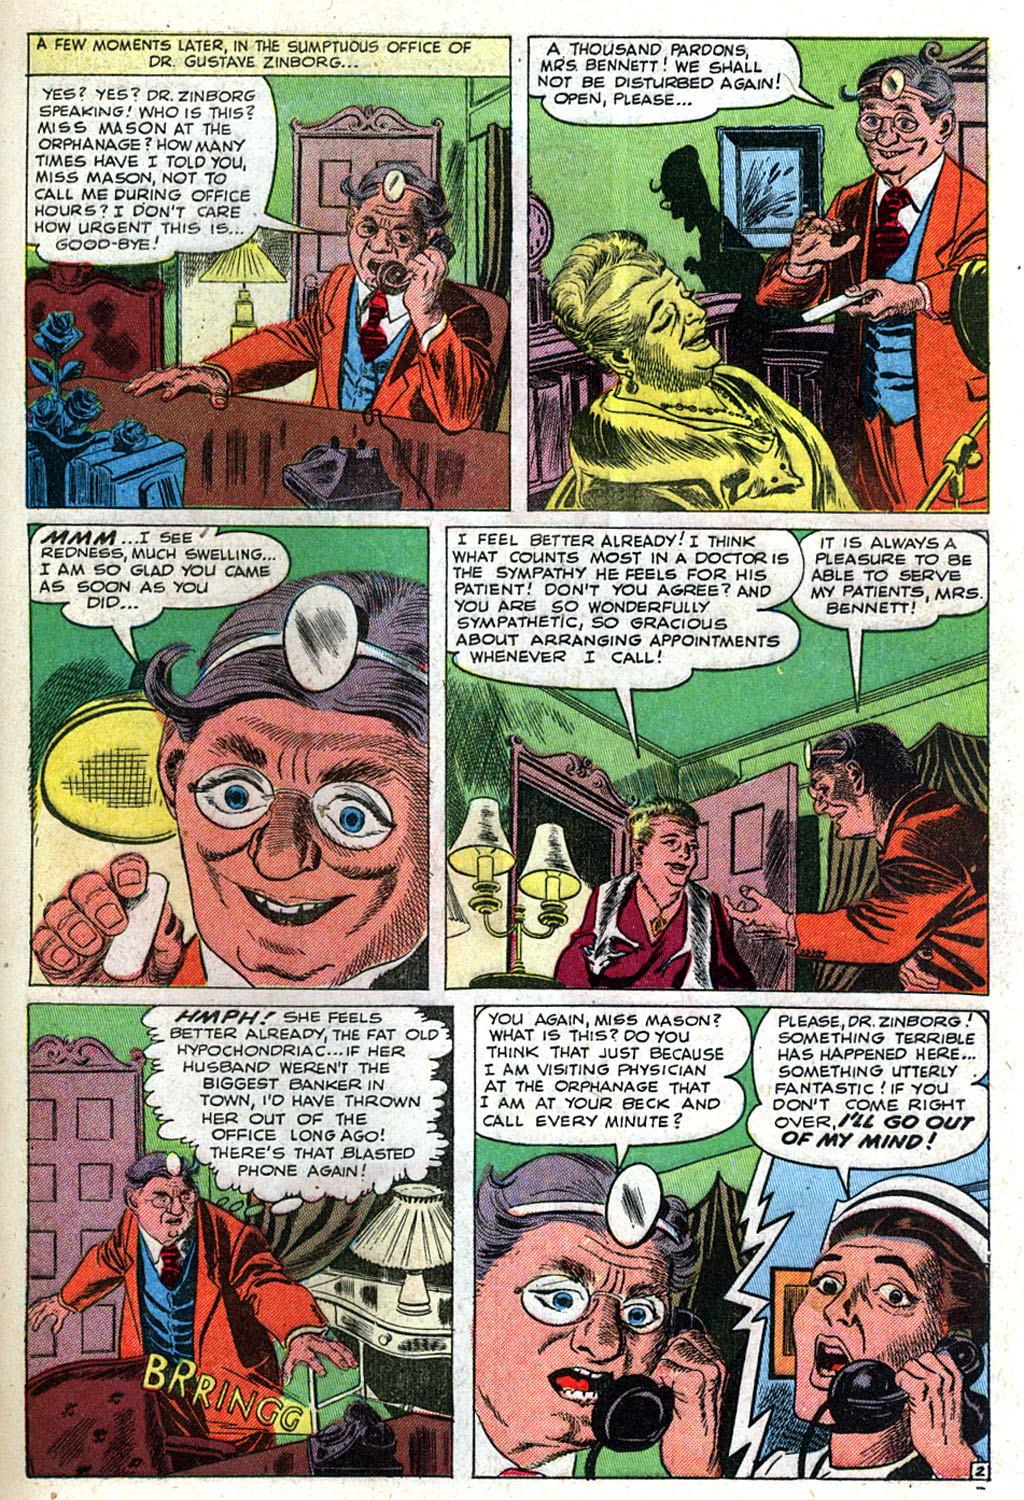 Marvel Tales (1949) 116 Page 27